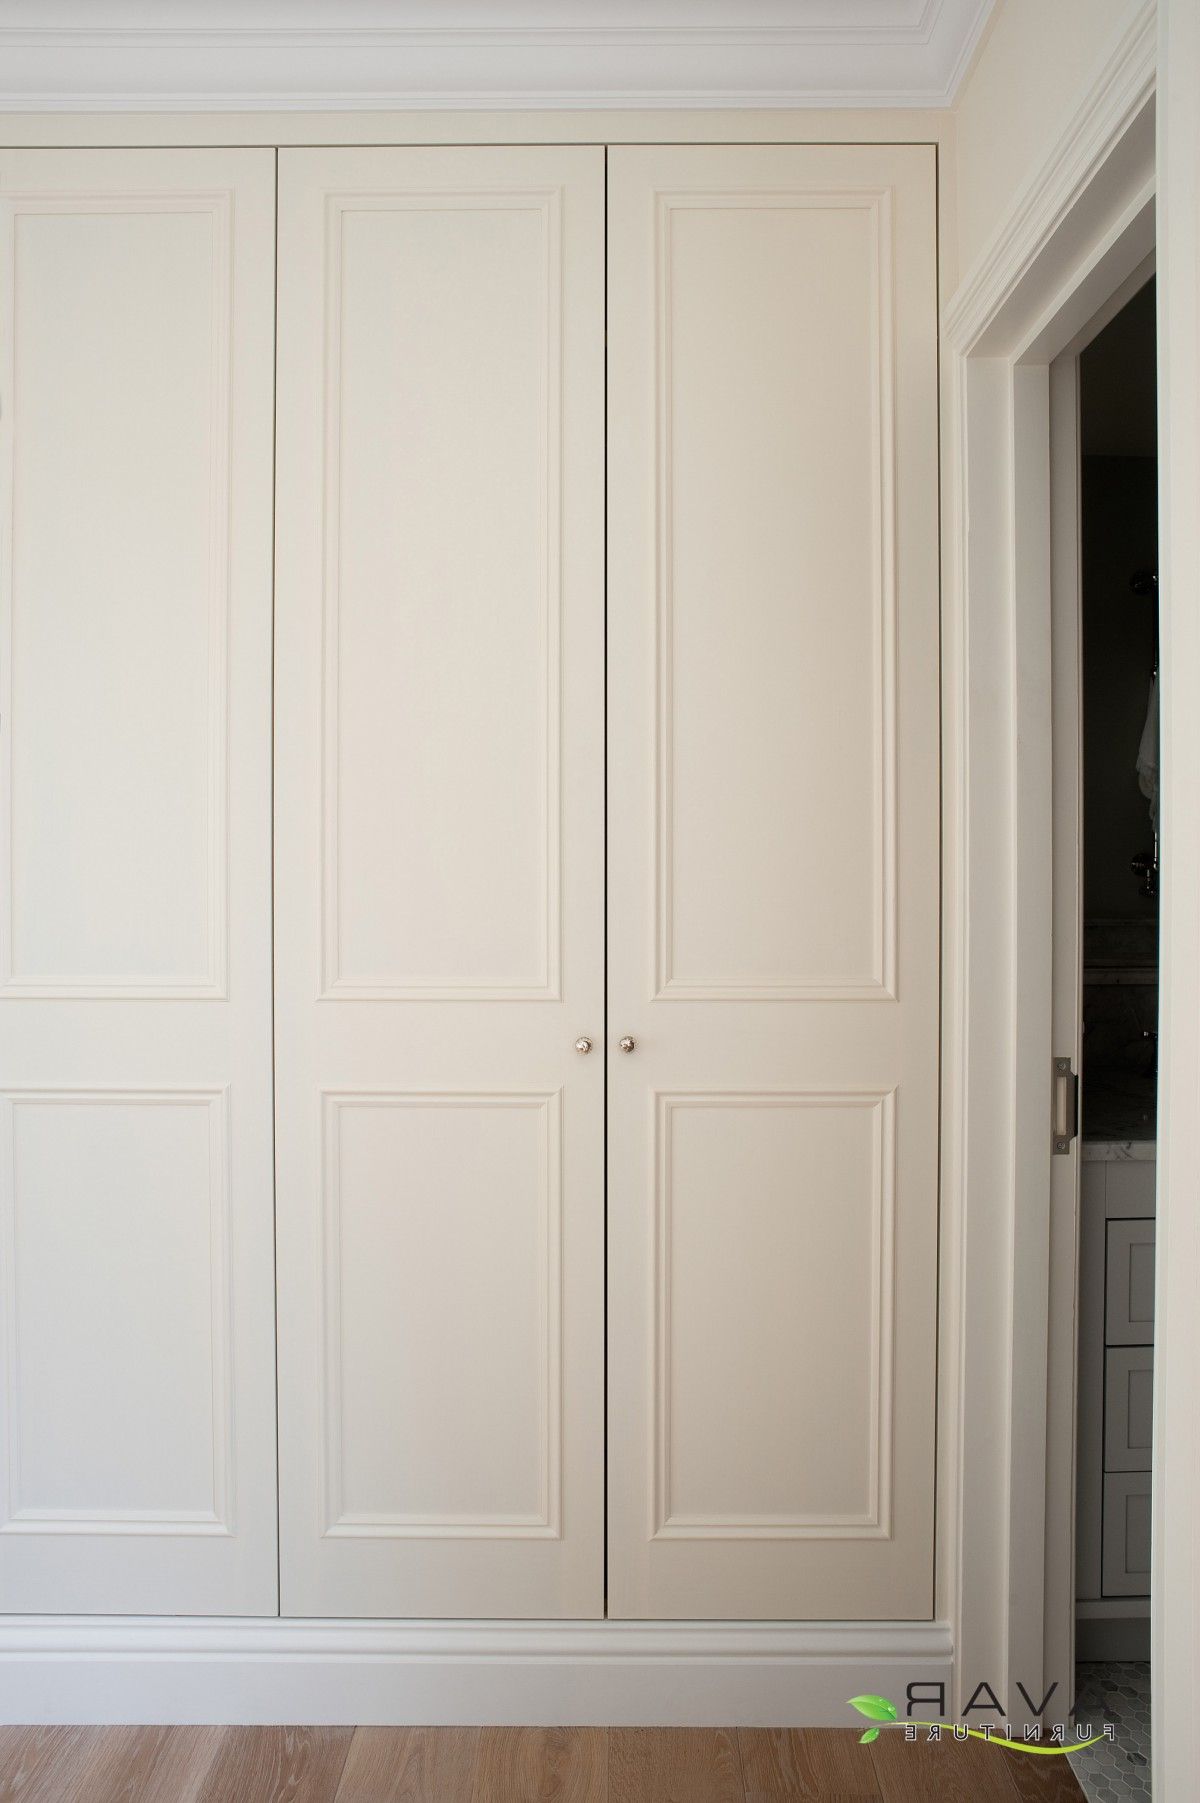 Fitted Wardrobe Ideas Gallery 28 | North London, Uk | Avar Furniture With Regard To French Style Fitted Wardrobes (View 14 of 20)